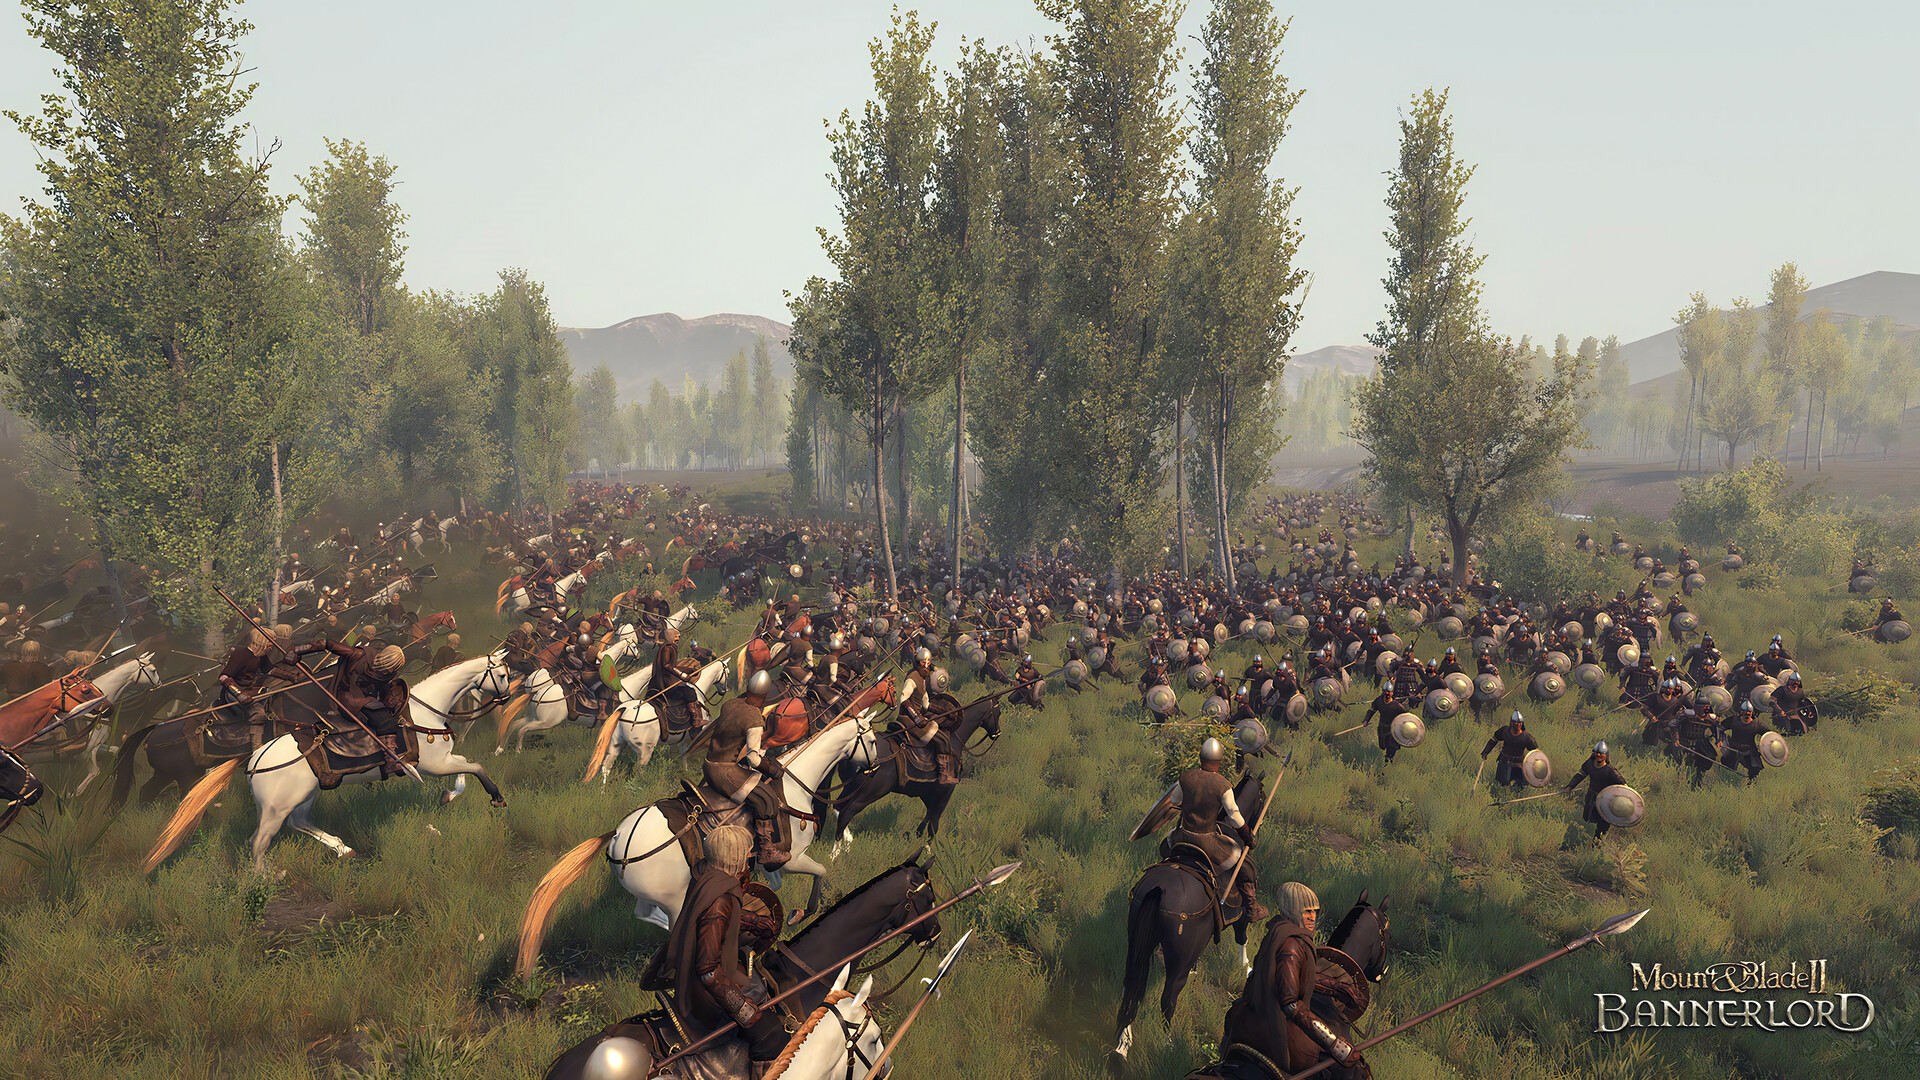 Mount & Blade II: Bannerlord on Steam